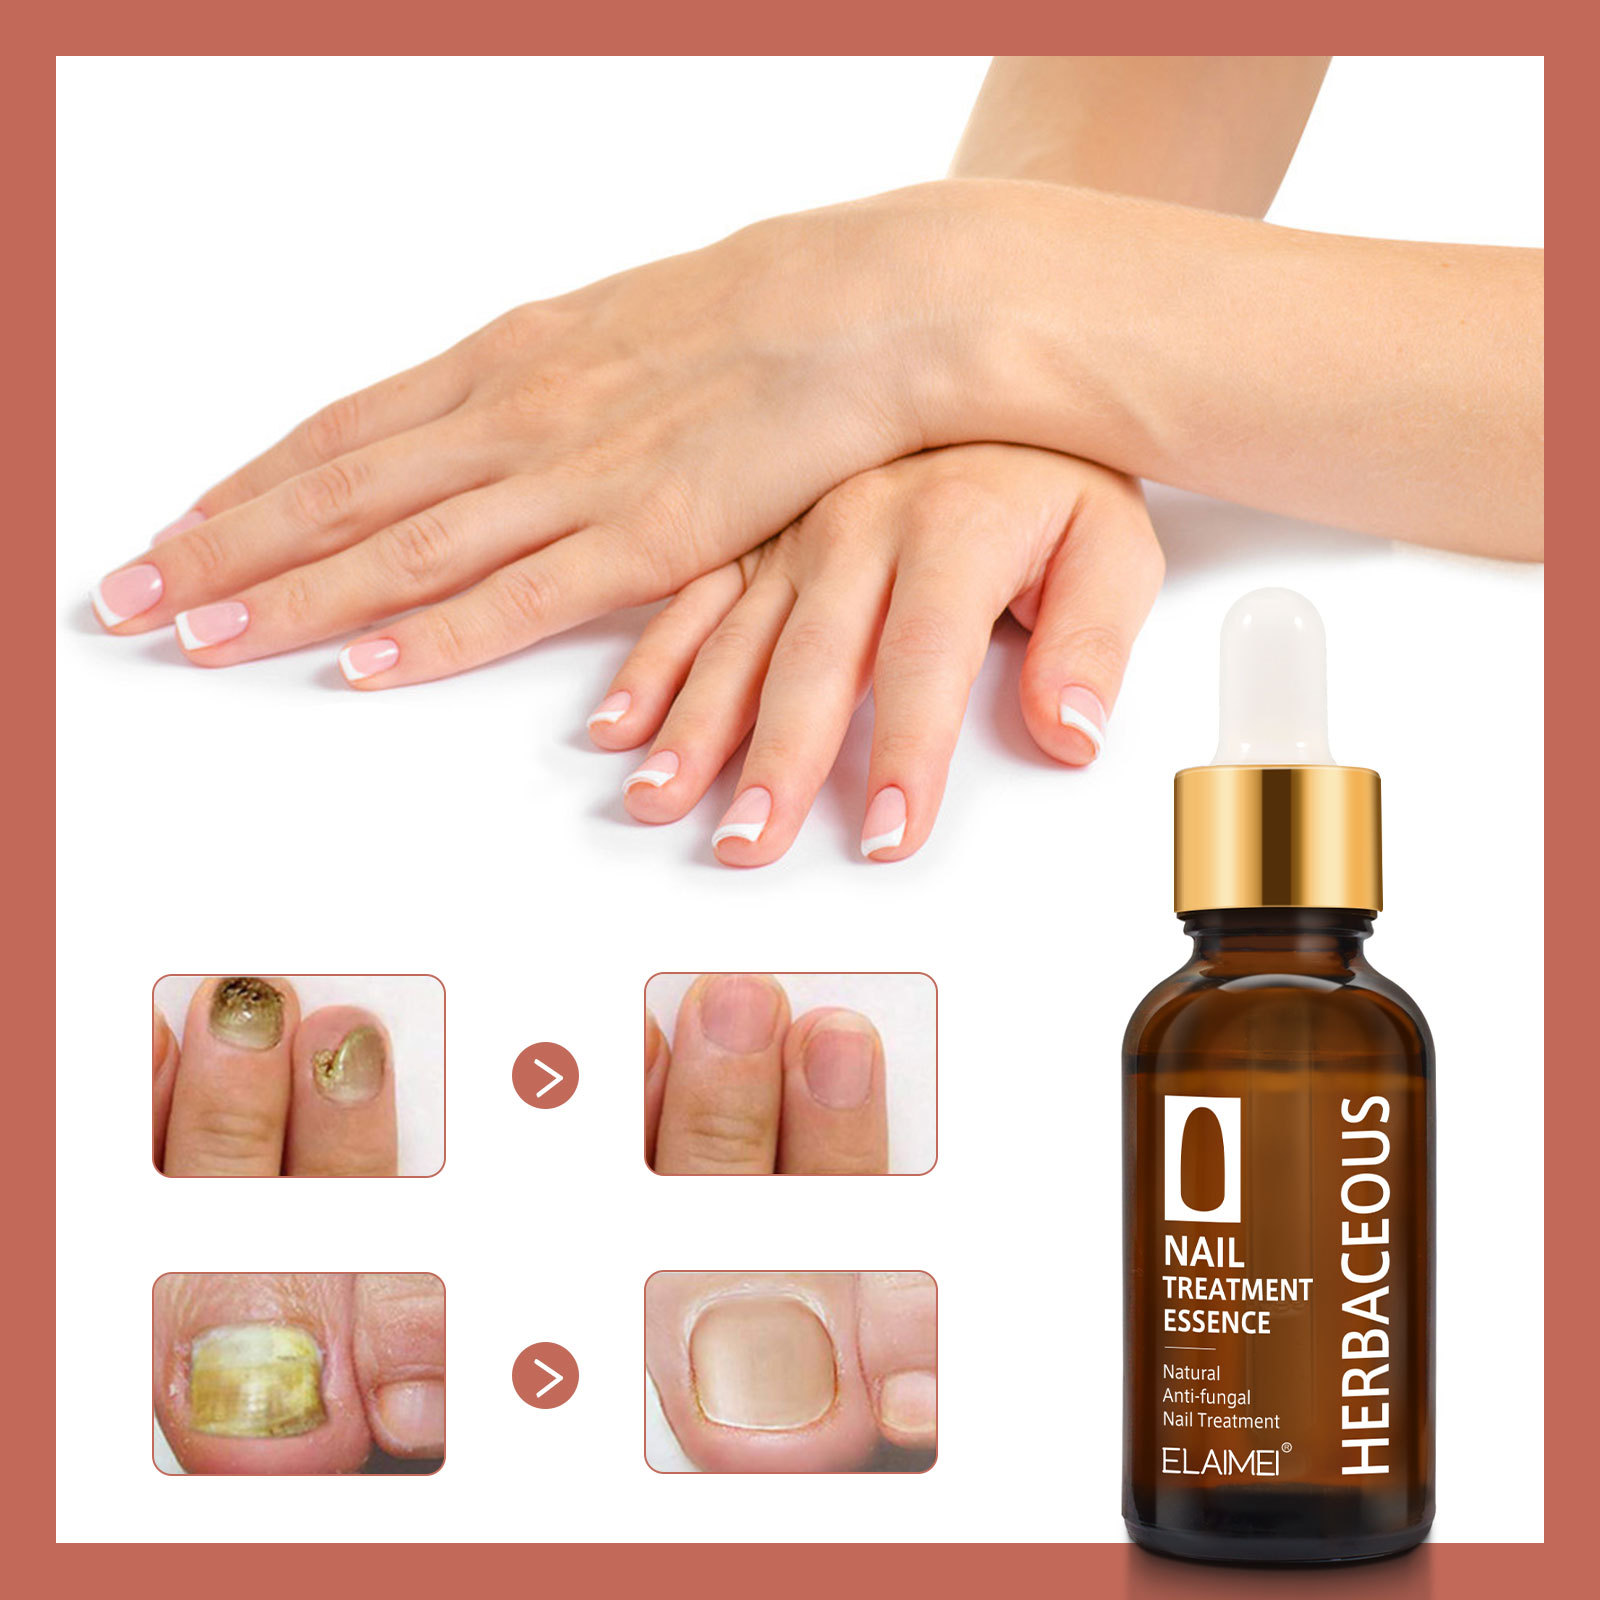 Elaimei nail care solution for foreign trade